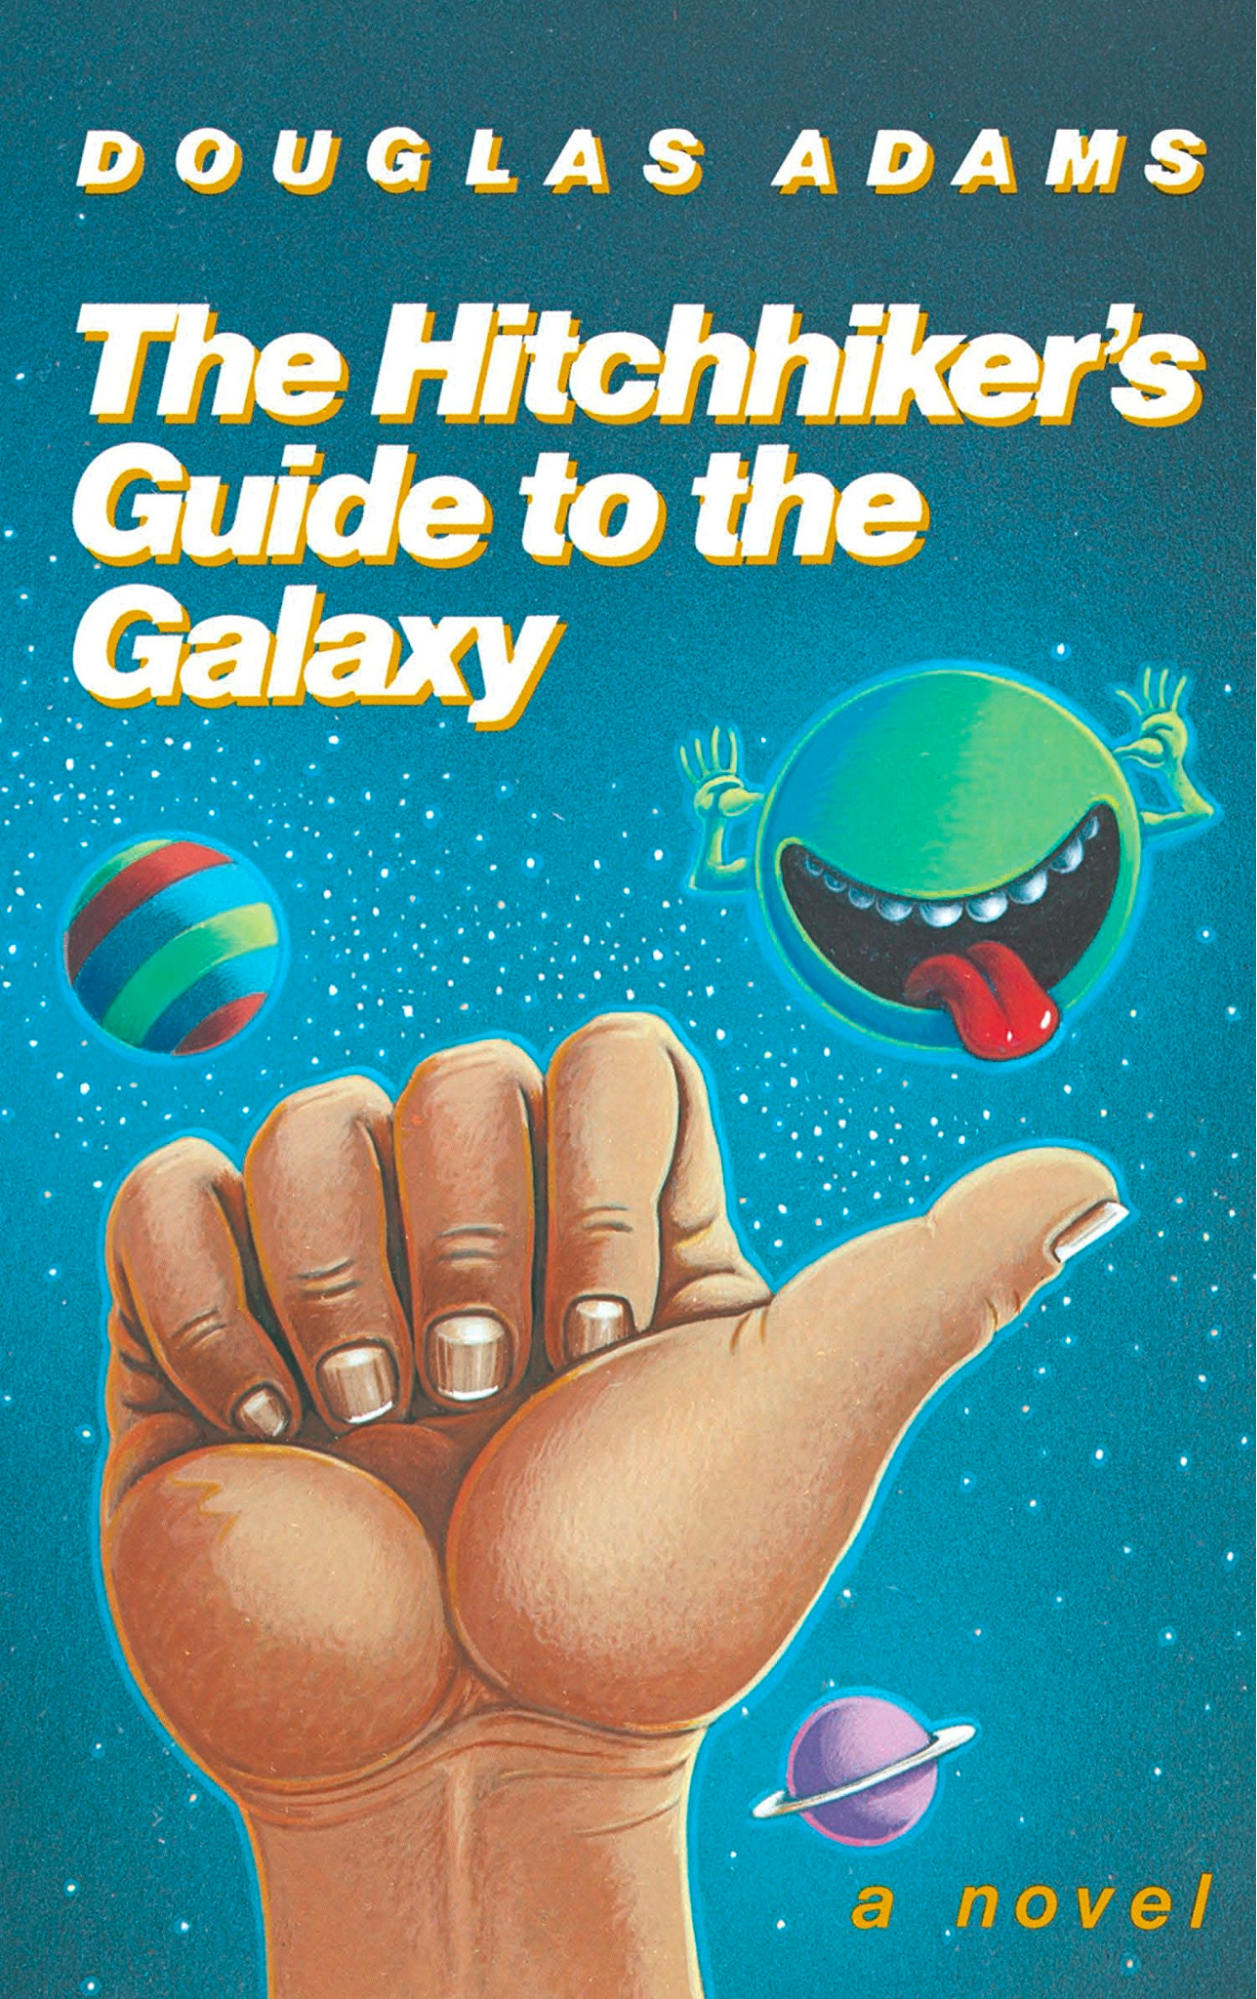 Book Review: The Hitchhiker's Guide to the Galaxy